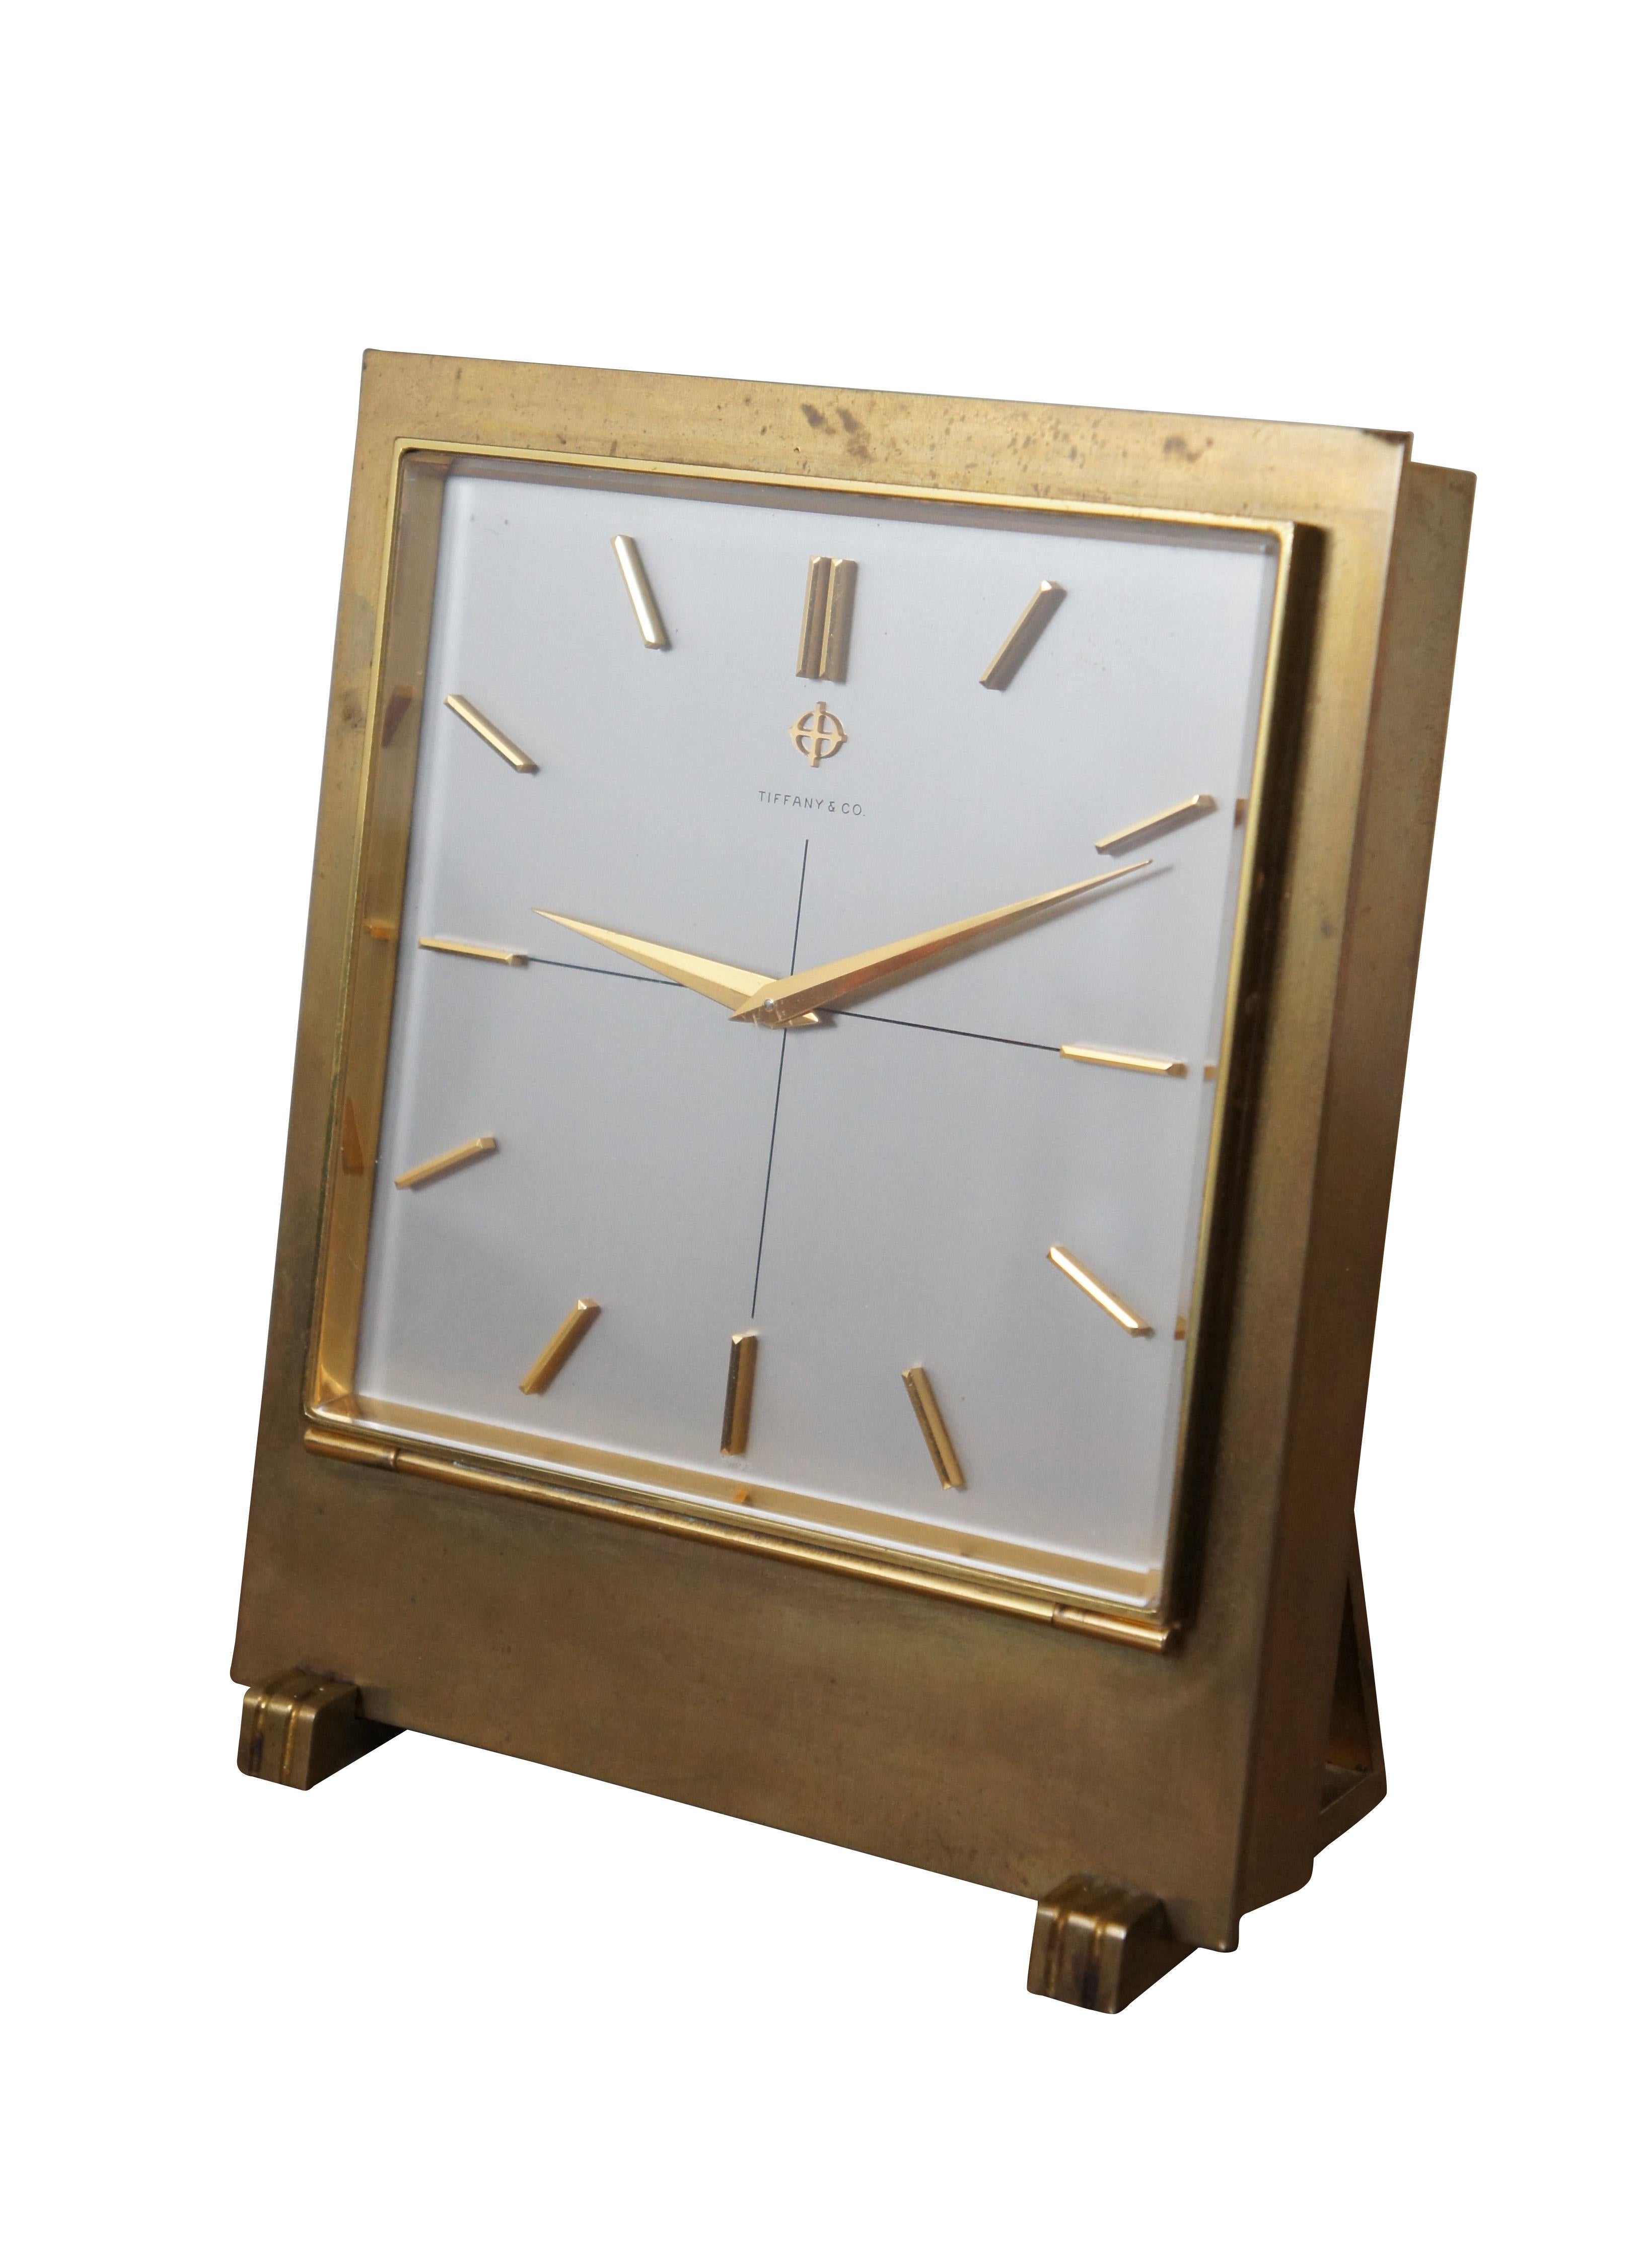 Mid century Tiffany & Company gilt metal battery operated desk clock featuring a rectangular form with art deco feet and hands, and minimalist dashes representing the numbers. Manufactured by Zodiac Limited. 15 Jewel Swiss works. Reference Number